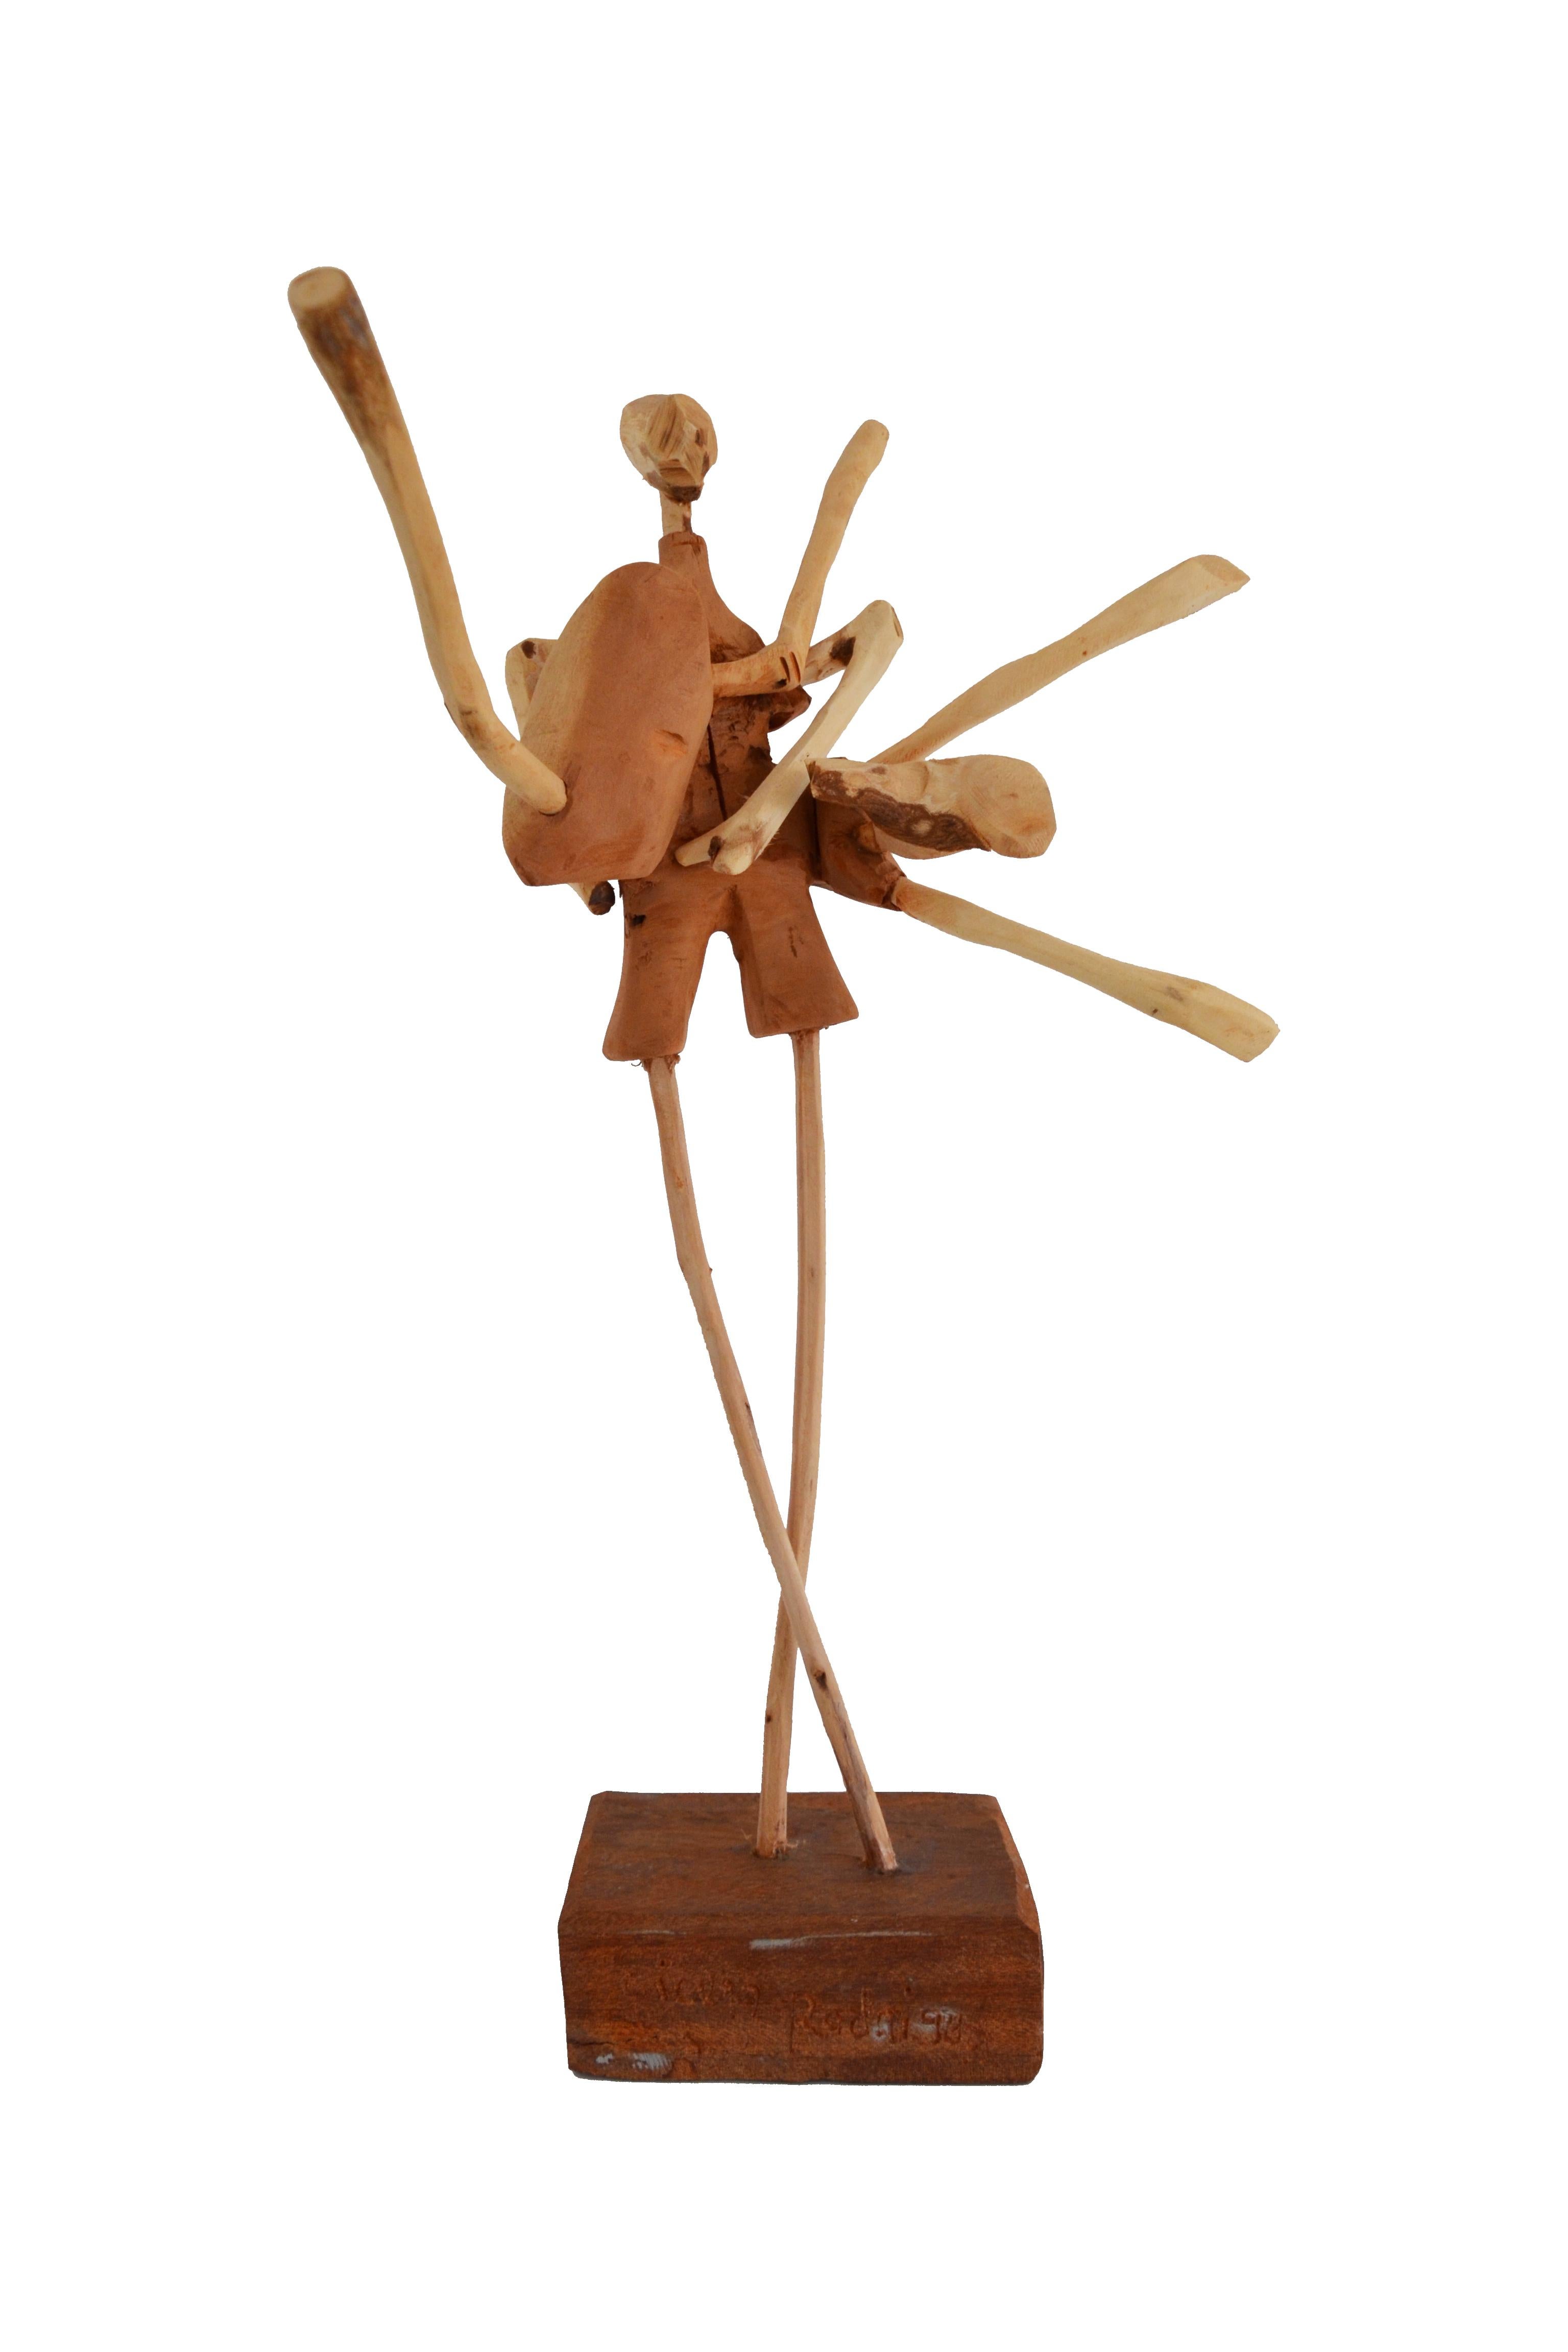 Unique piece by Brazilian artist Cícero Rodrigues, from Petrolina, Pernambuco. This is one of the many wooden ballerinas from his collection. His ballerinas represent the female body, the constant movement of life and through the wood-carving, the